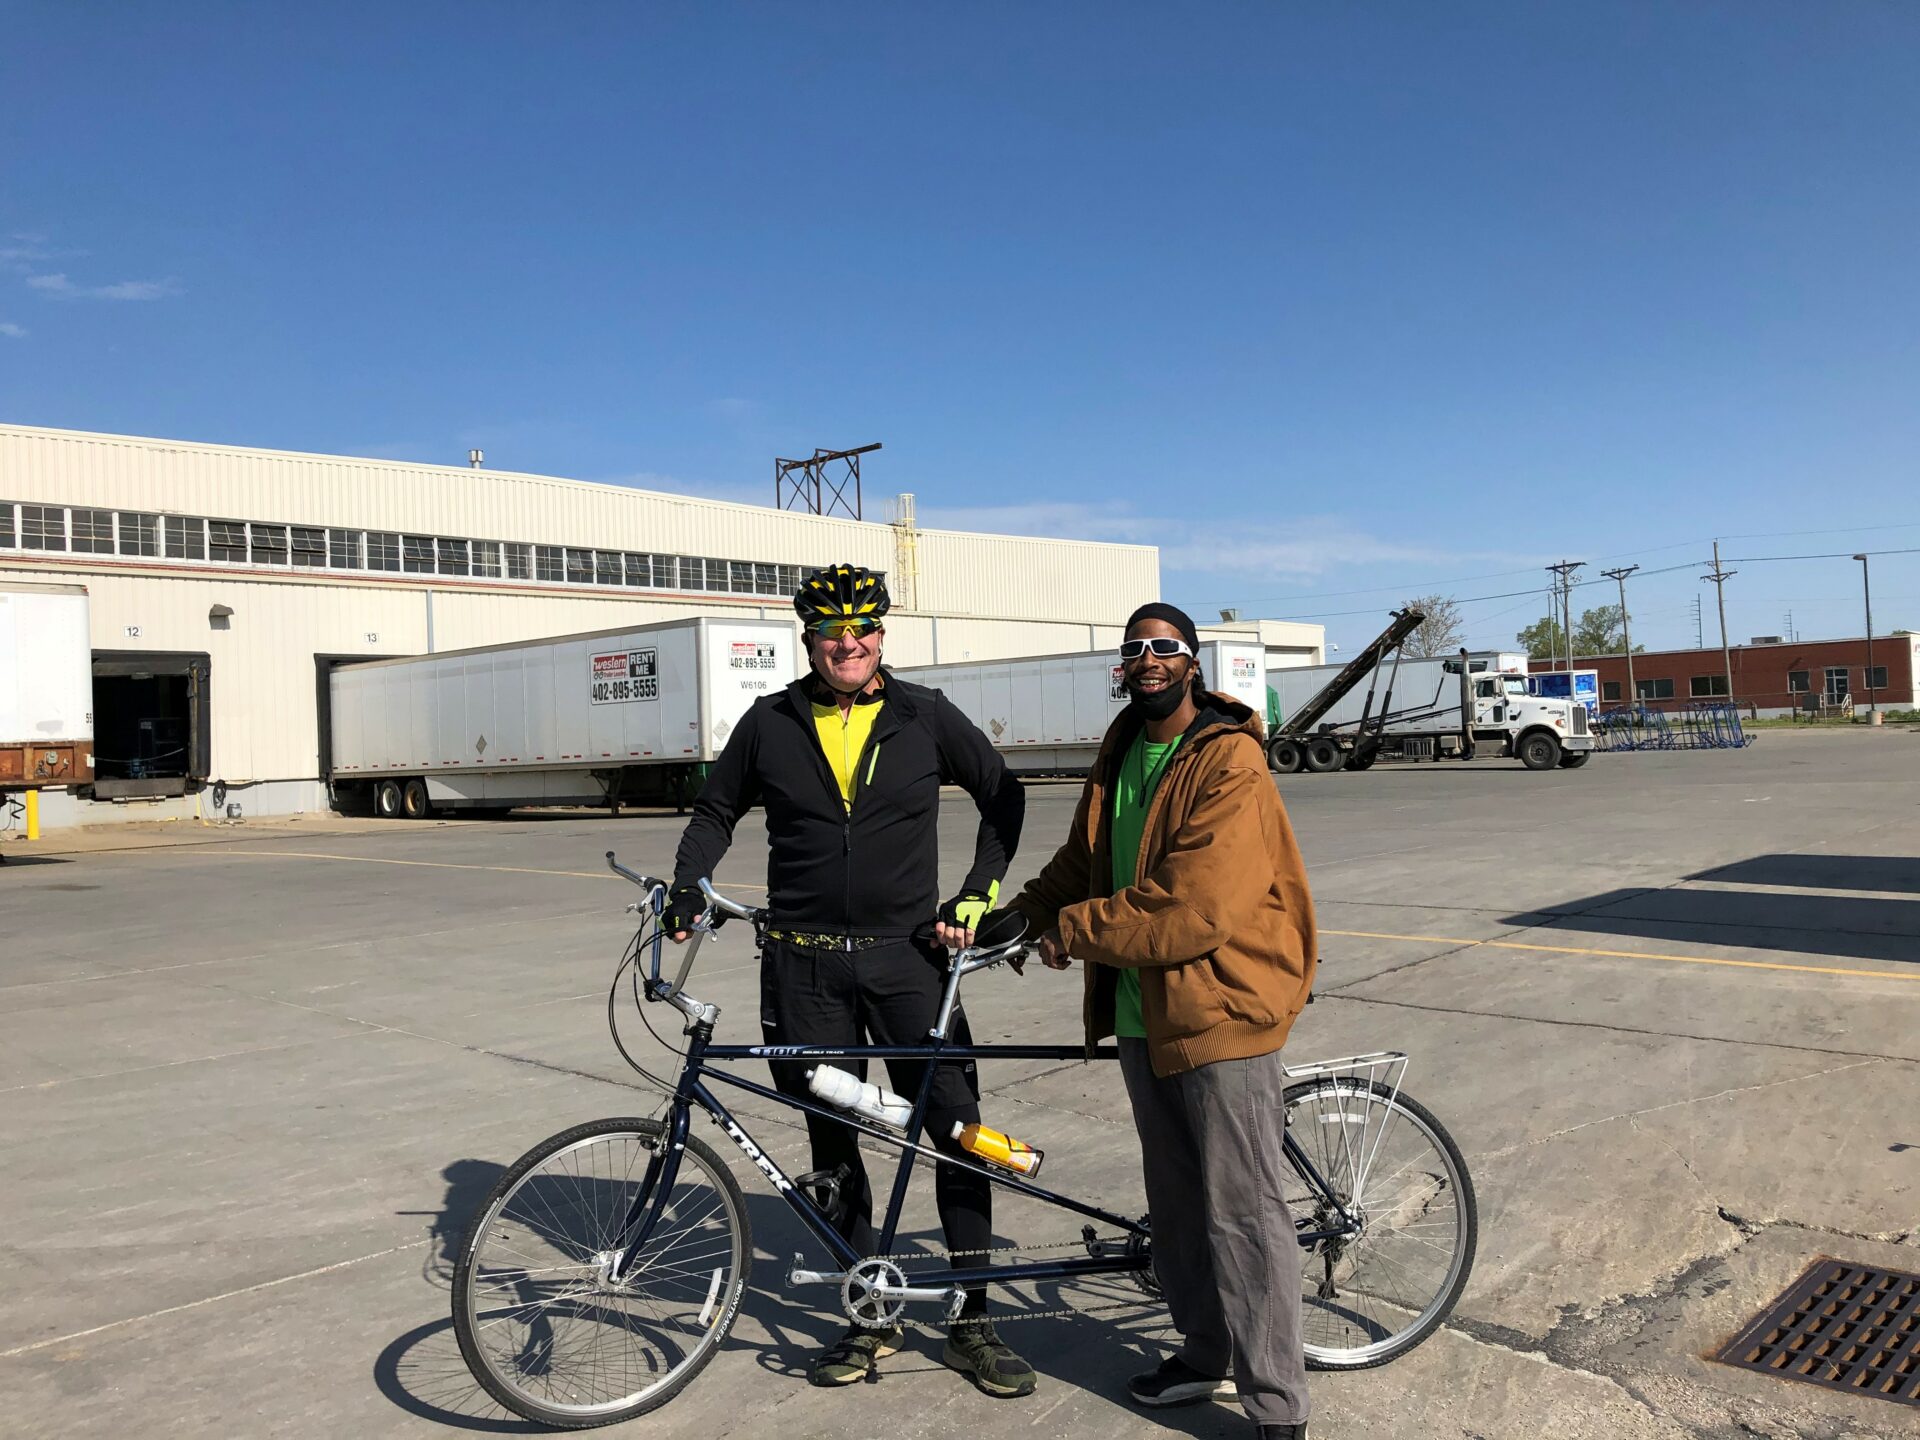 Two men standing behind a standard stand-up recumbent tandem bike. They are wearing helmets and outside in a parking lot about to take off for a ride.